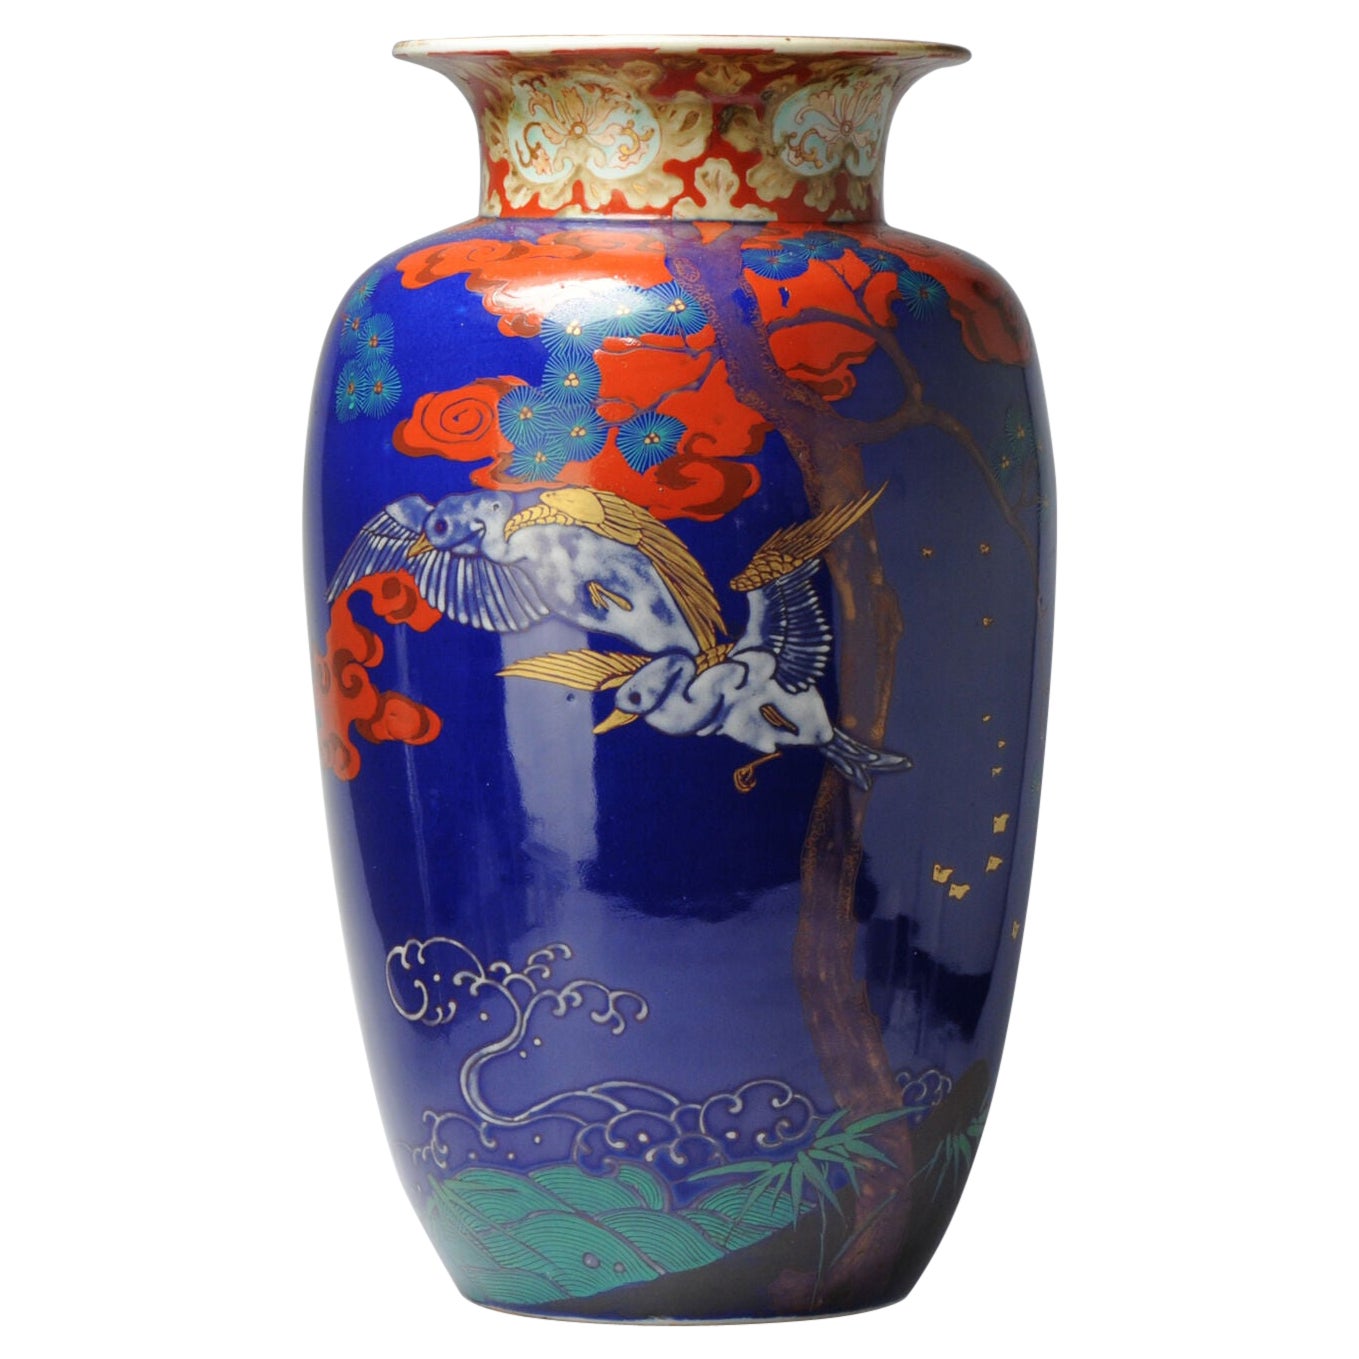 Rare Japanese Porcelain Antique Vase Marked Hichozan, 19th Century For Sale